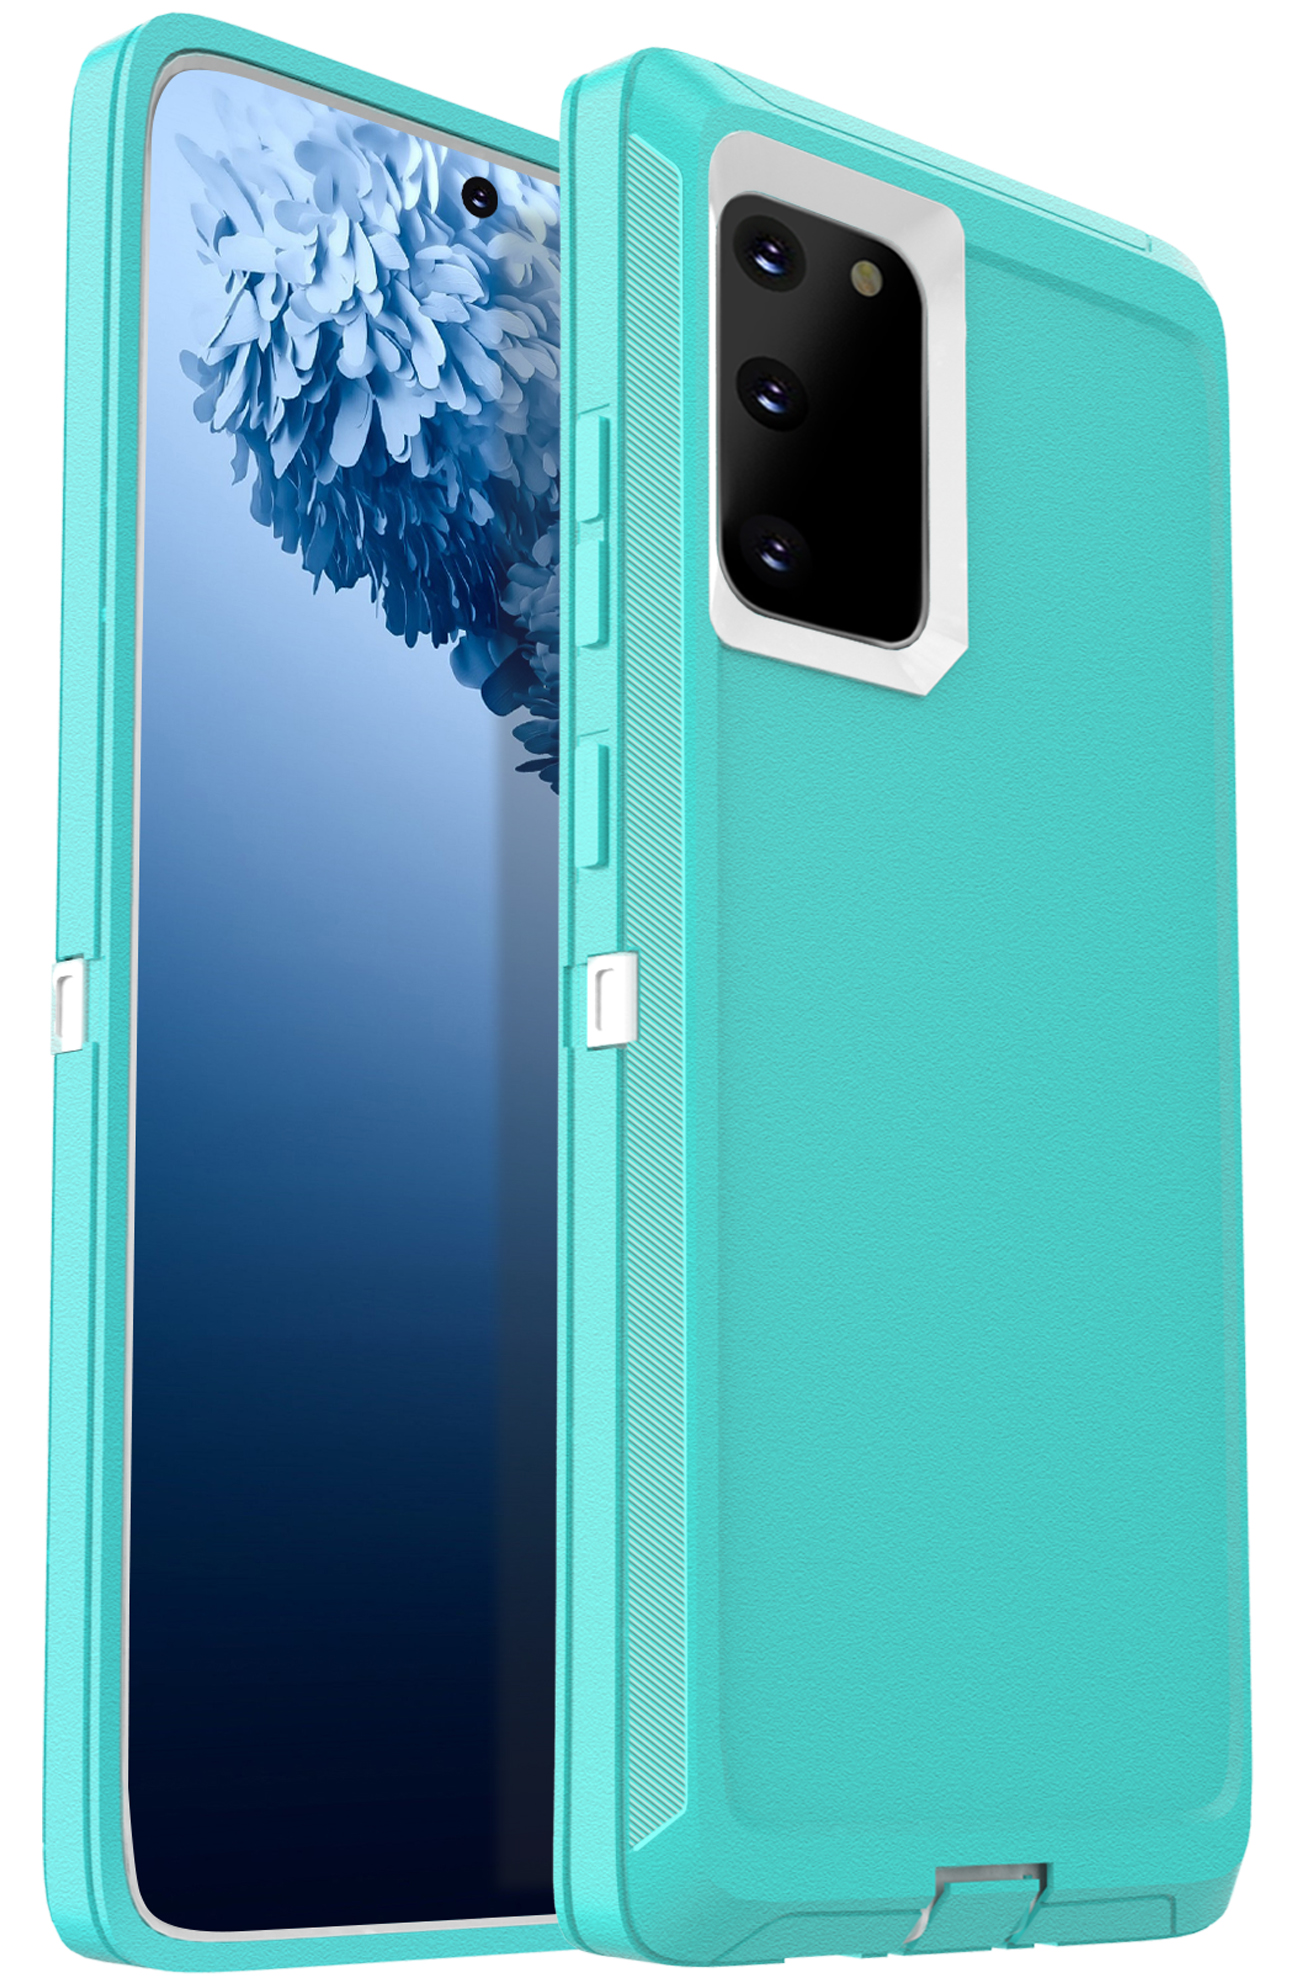 FOGEEK Compatible with Samsung Galaxy S20 5G Case, Heavy Duty Rugged Case, Protective Cover (Shockproof)(Drop Proof) Case for Galaxy S20 5G (6.2 inch) 2020 (Aqua Mint/White)